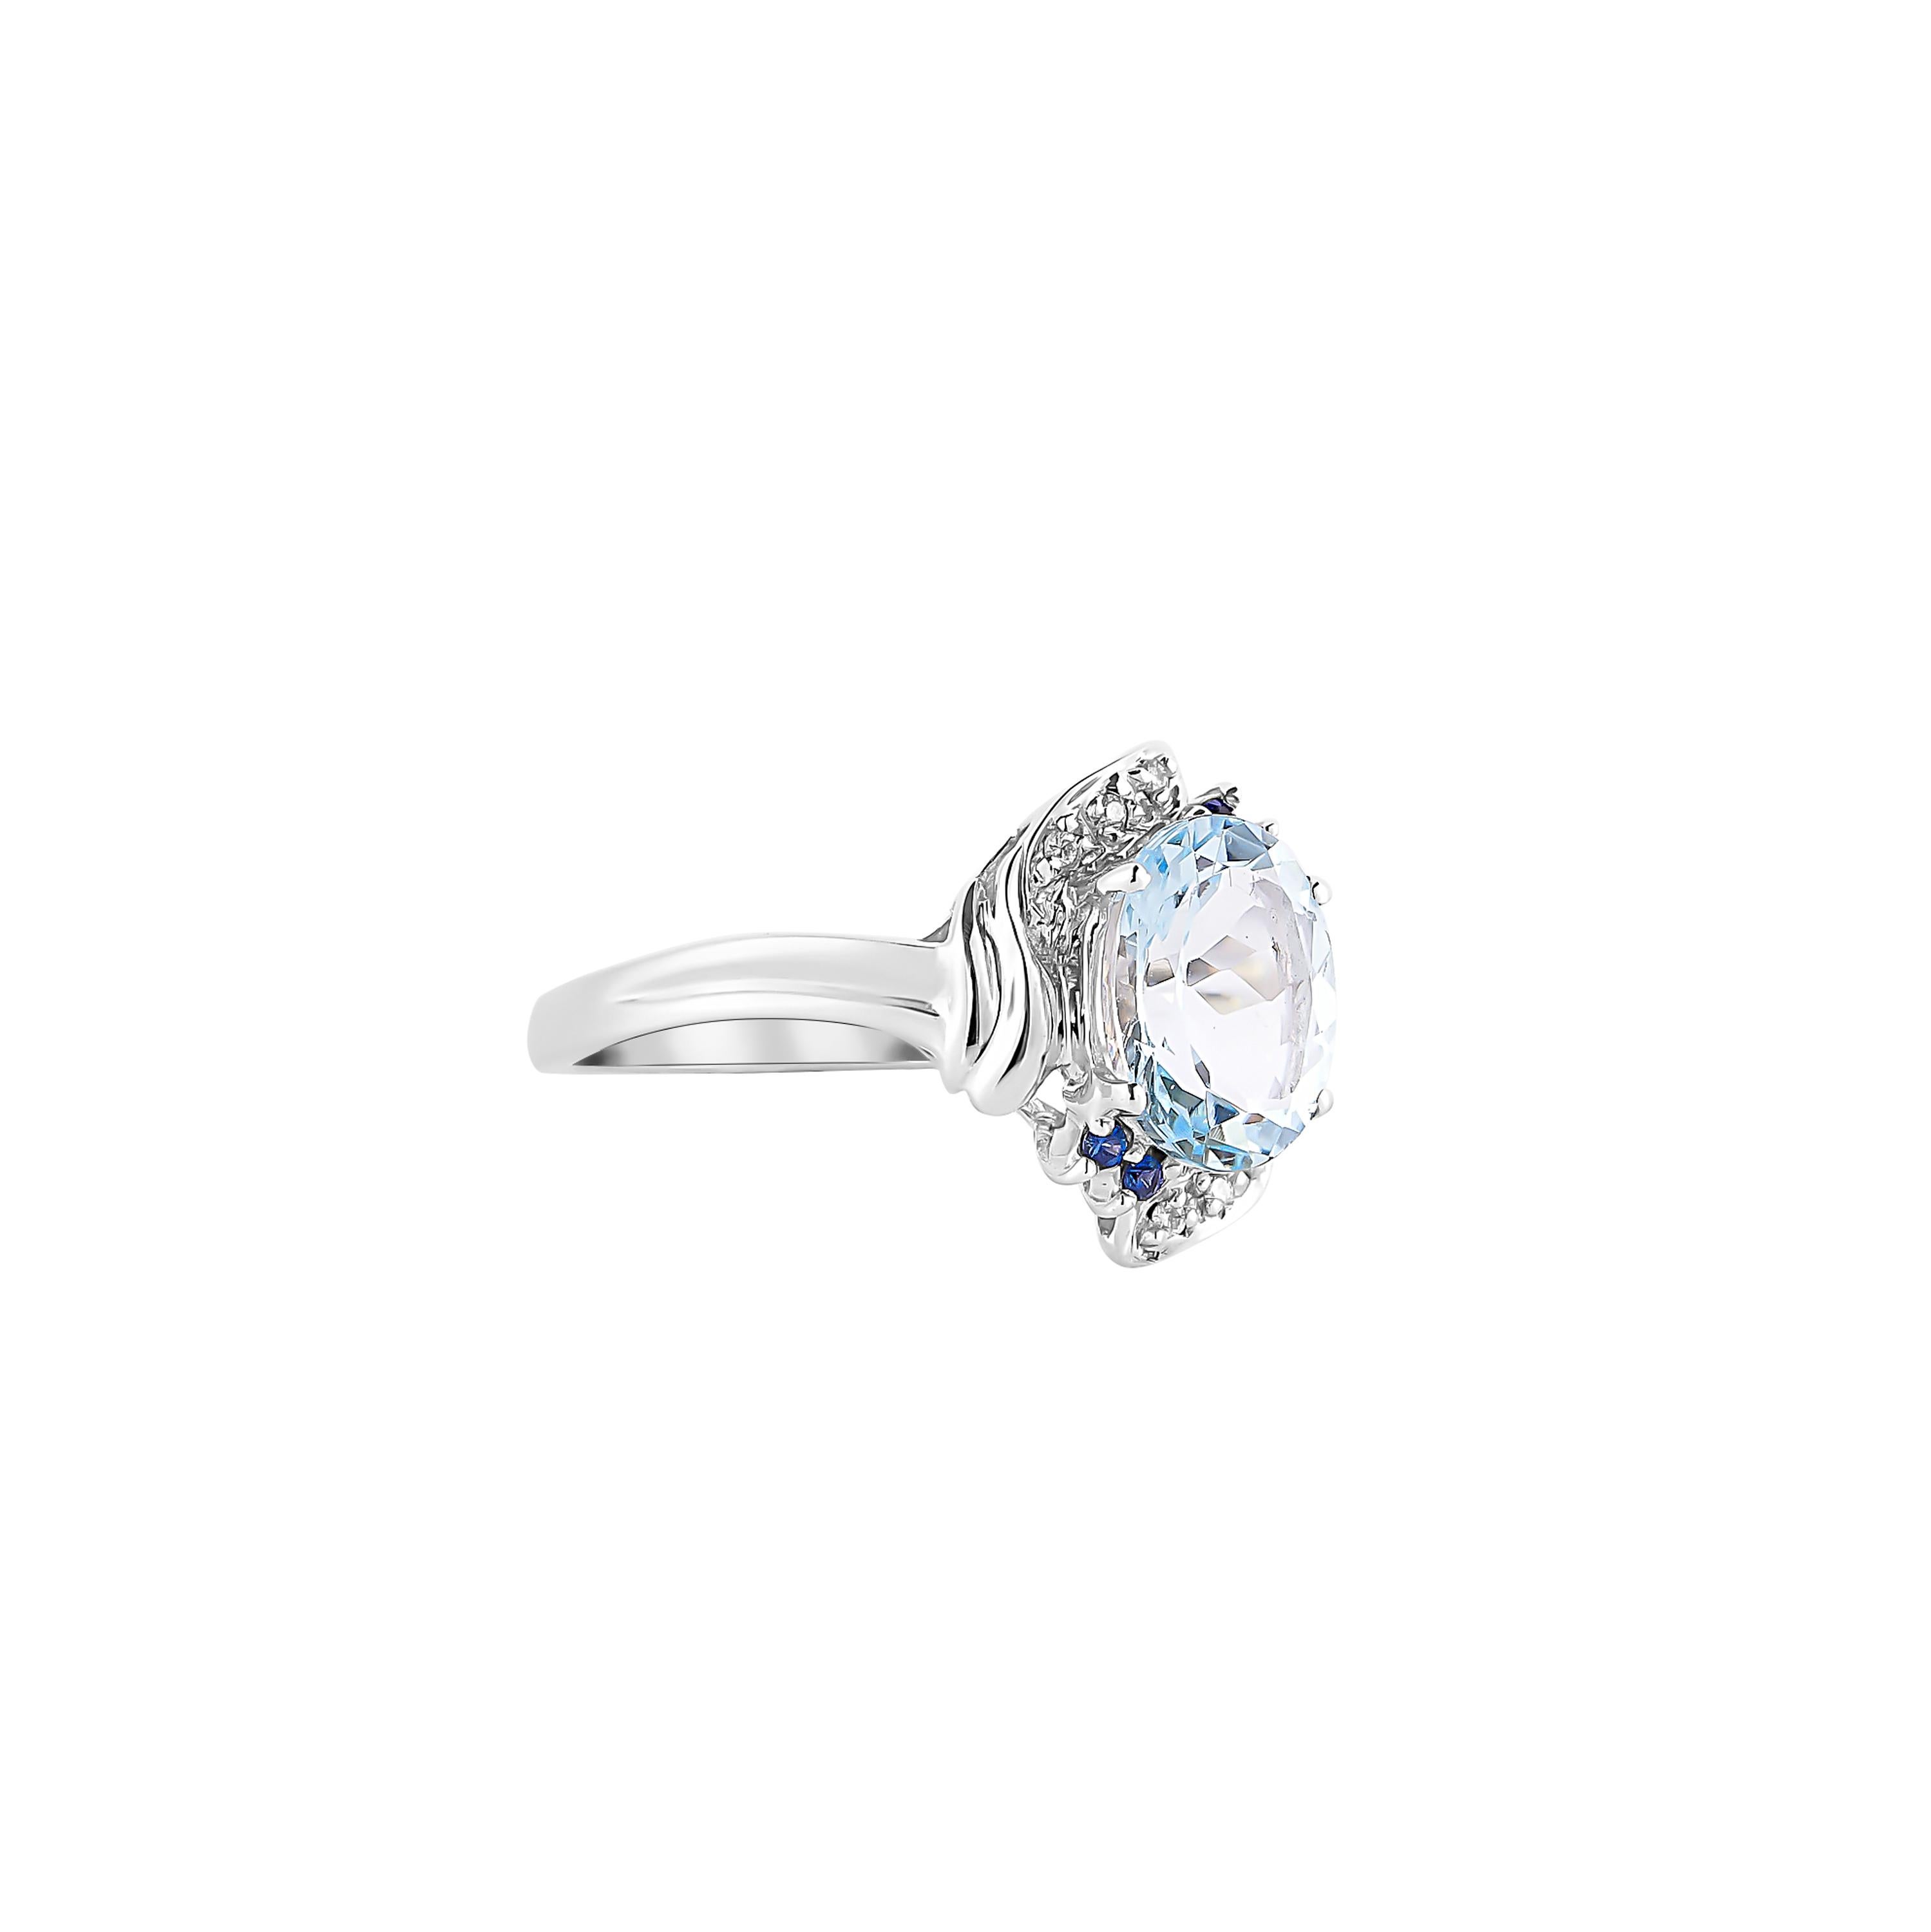 This collection features an array of aquamarines with an icy blue hue that is as cool as it gets! Accented with diamonds these rings are made in white and present a classic yet elegant look. 

Classic aquamarine ring in 14K white gold with blue